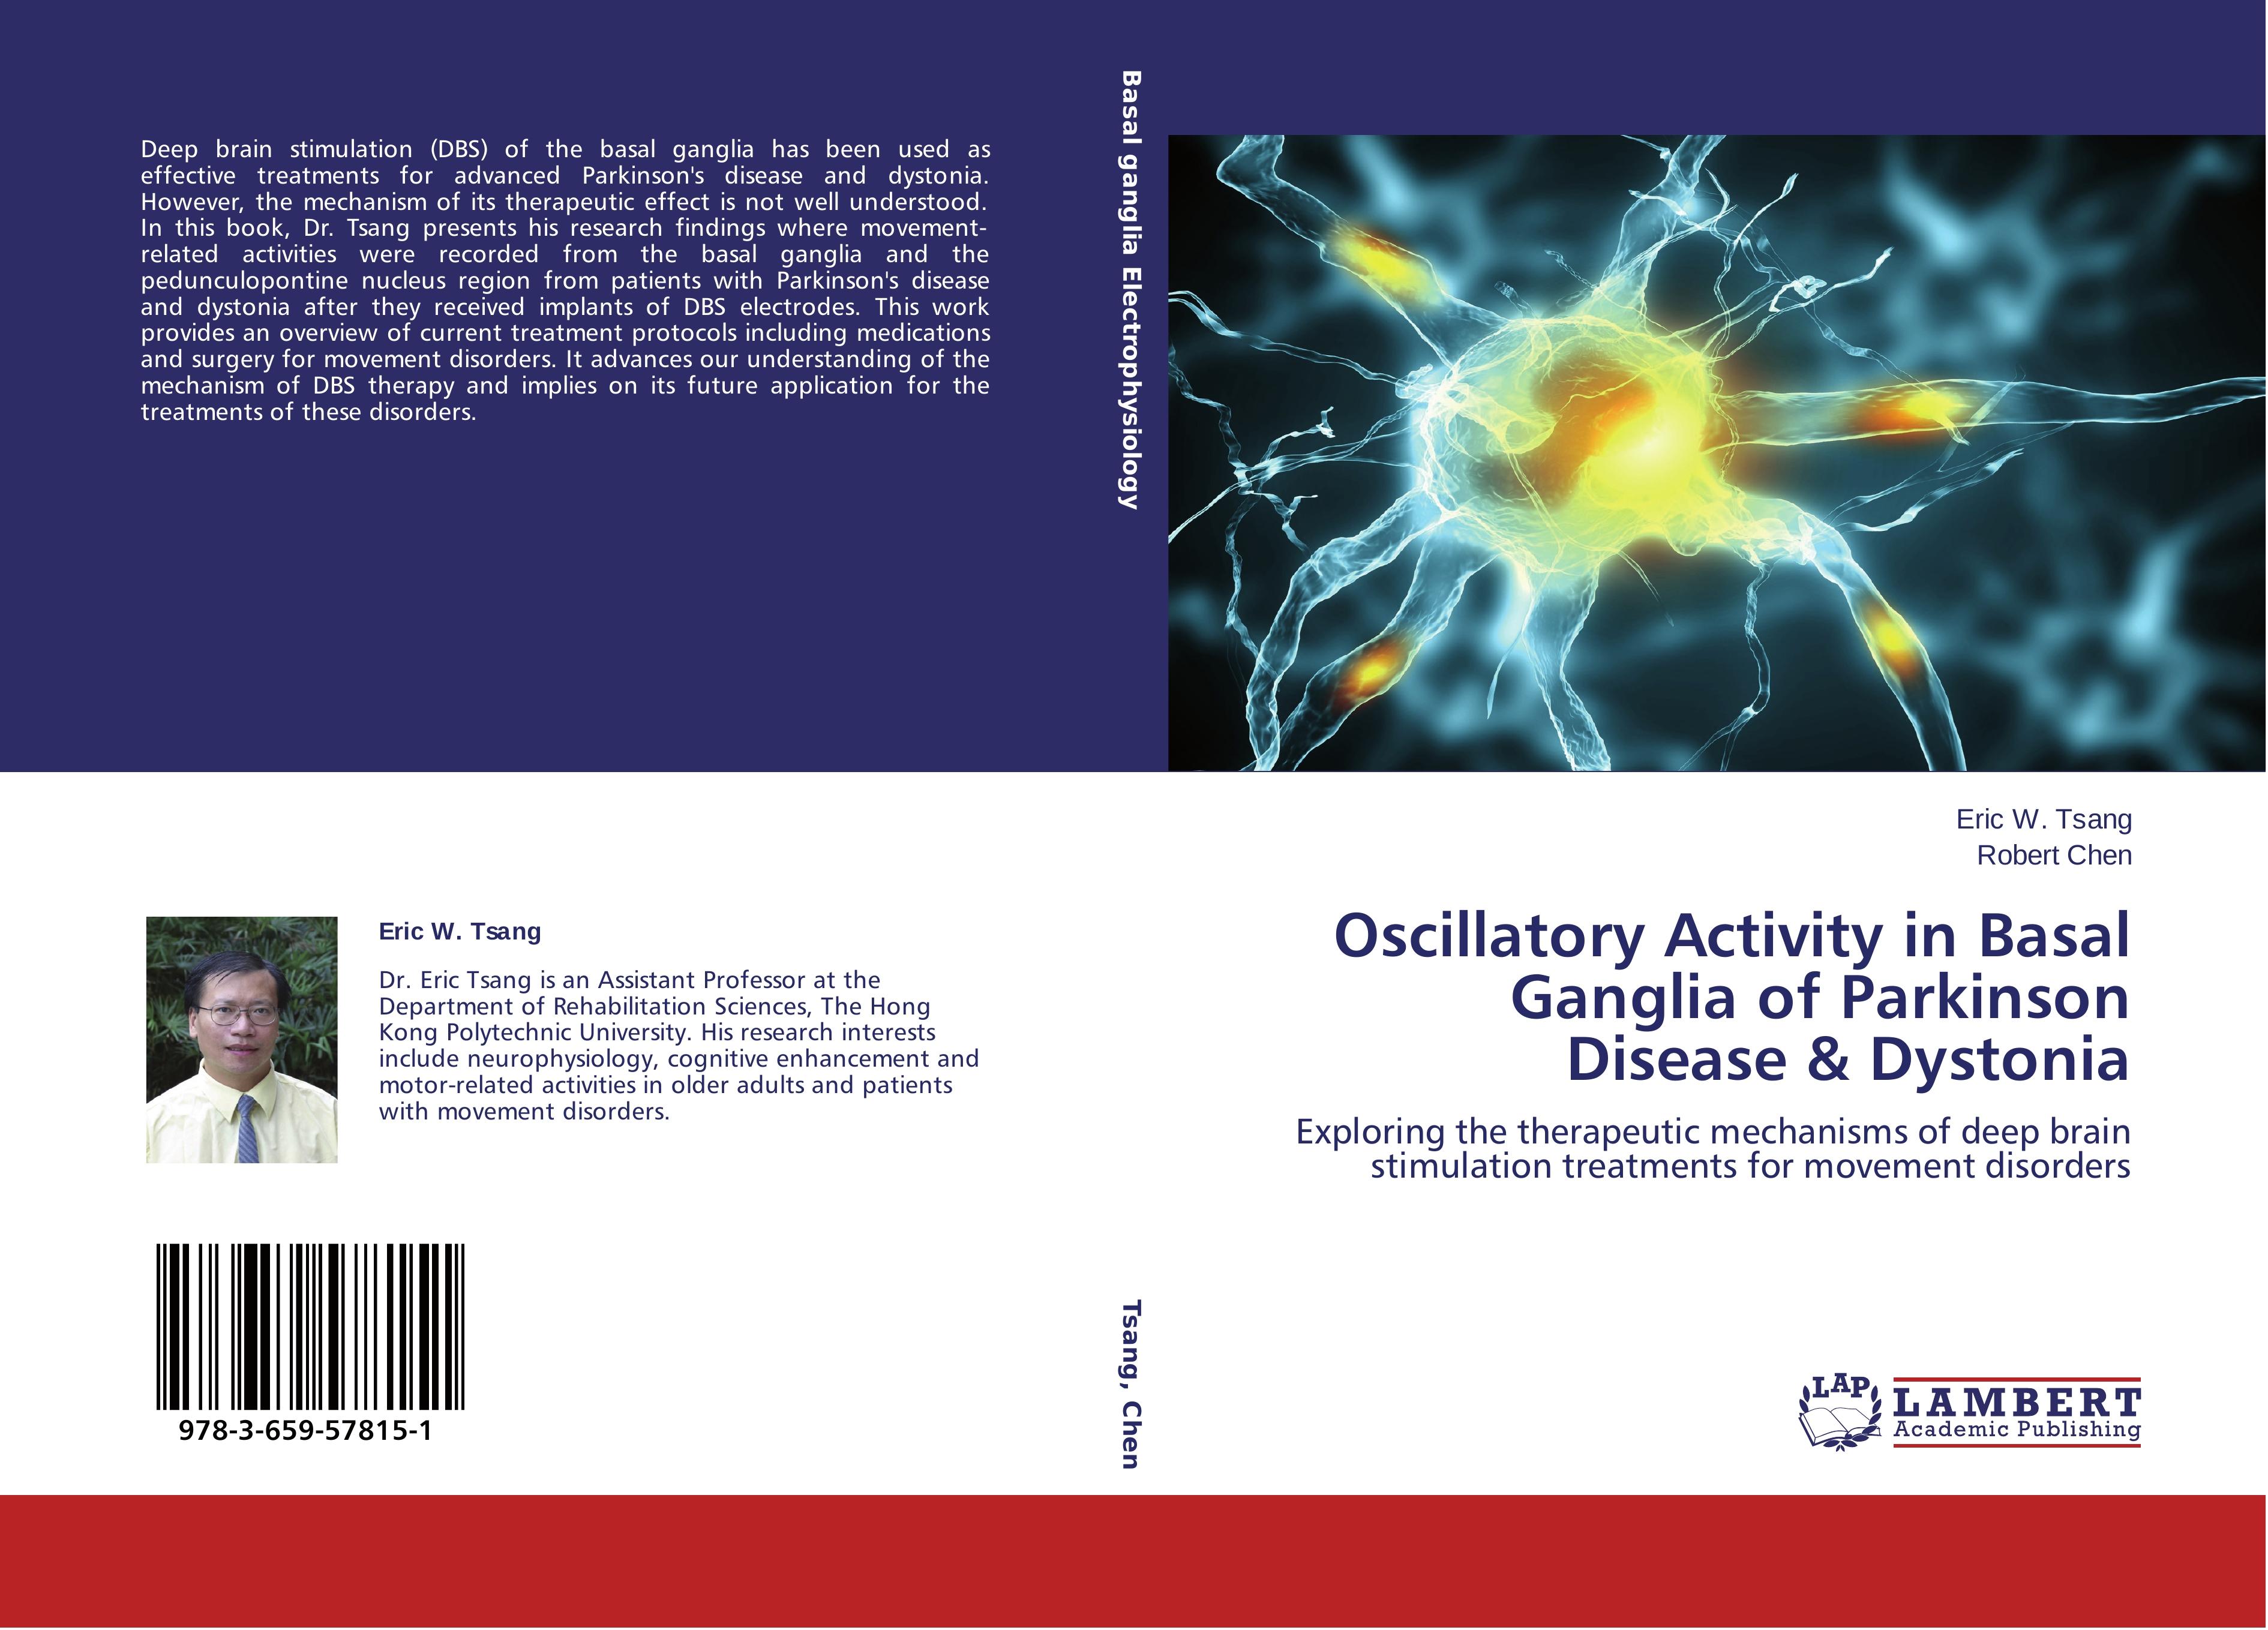 Oscillatory Activity in Basal Ganglia of Parkinson Disease & Dystonia | Exploring the therapeutic mechanisms of deep brain stimulation treatments for movement disorders | Eric W. Tsang (u. a.) | Buch - Tsang, Eric W.